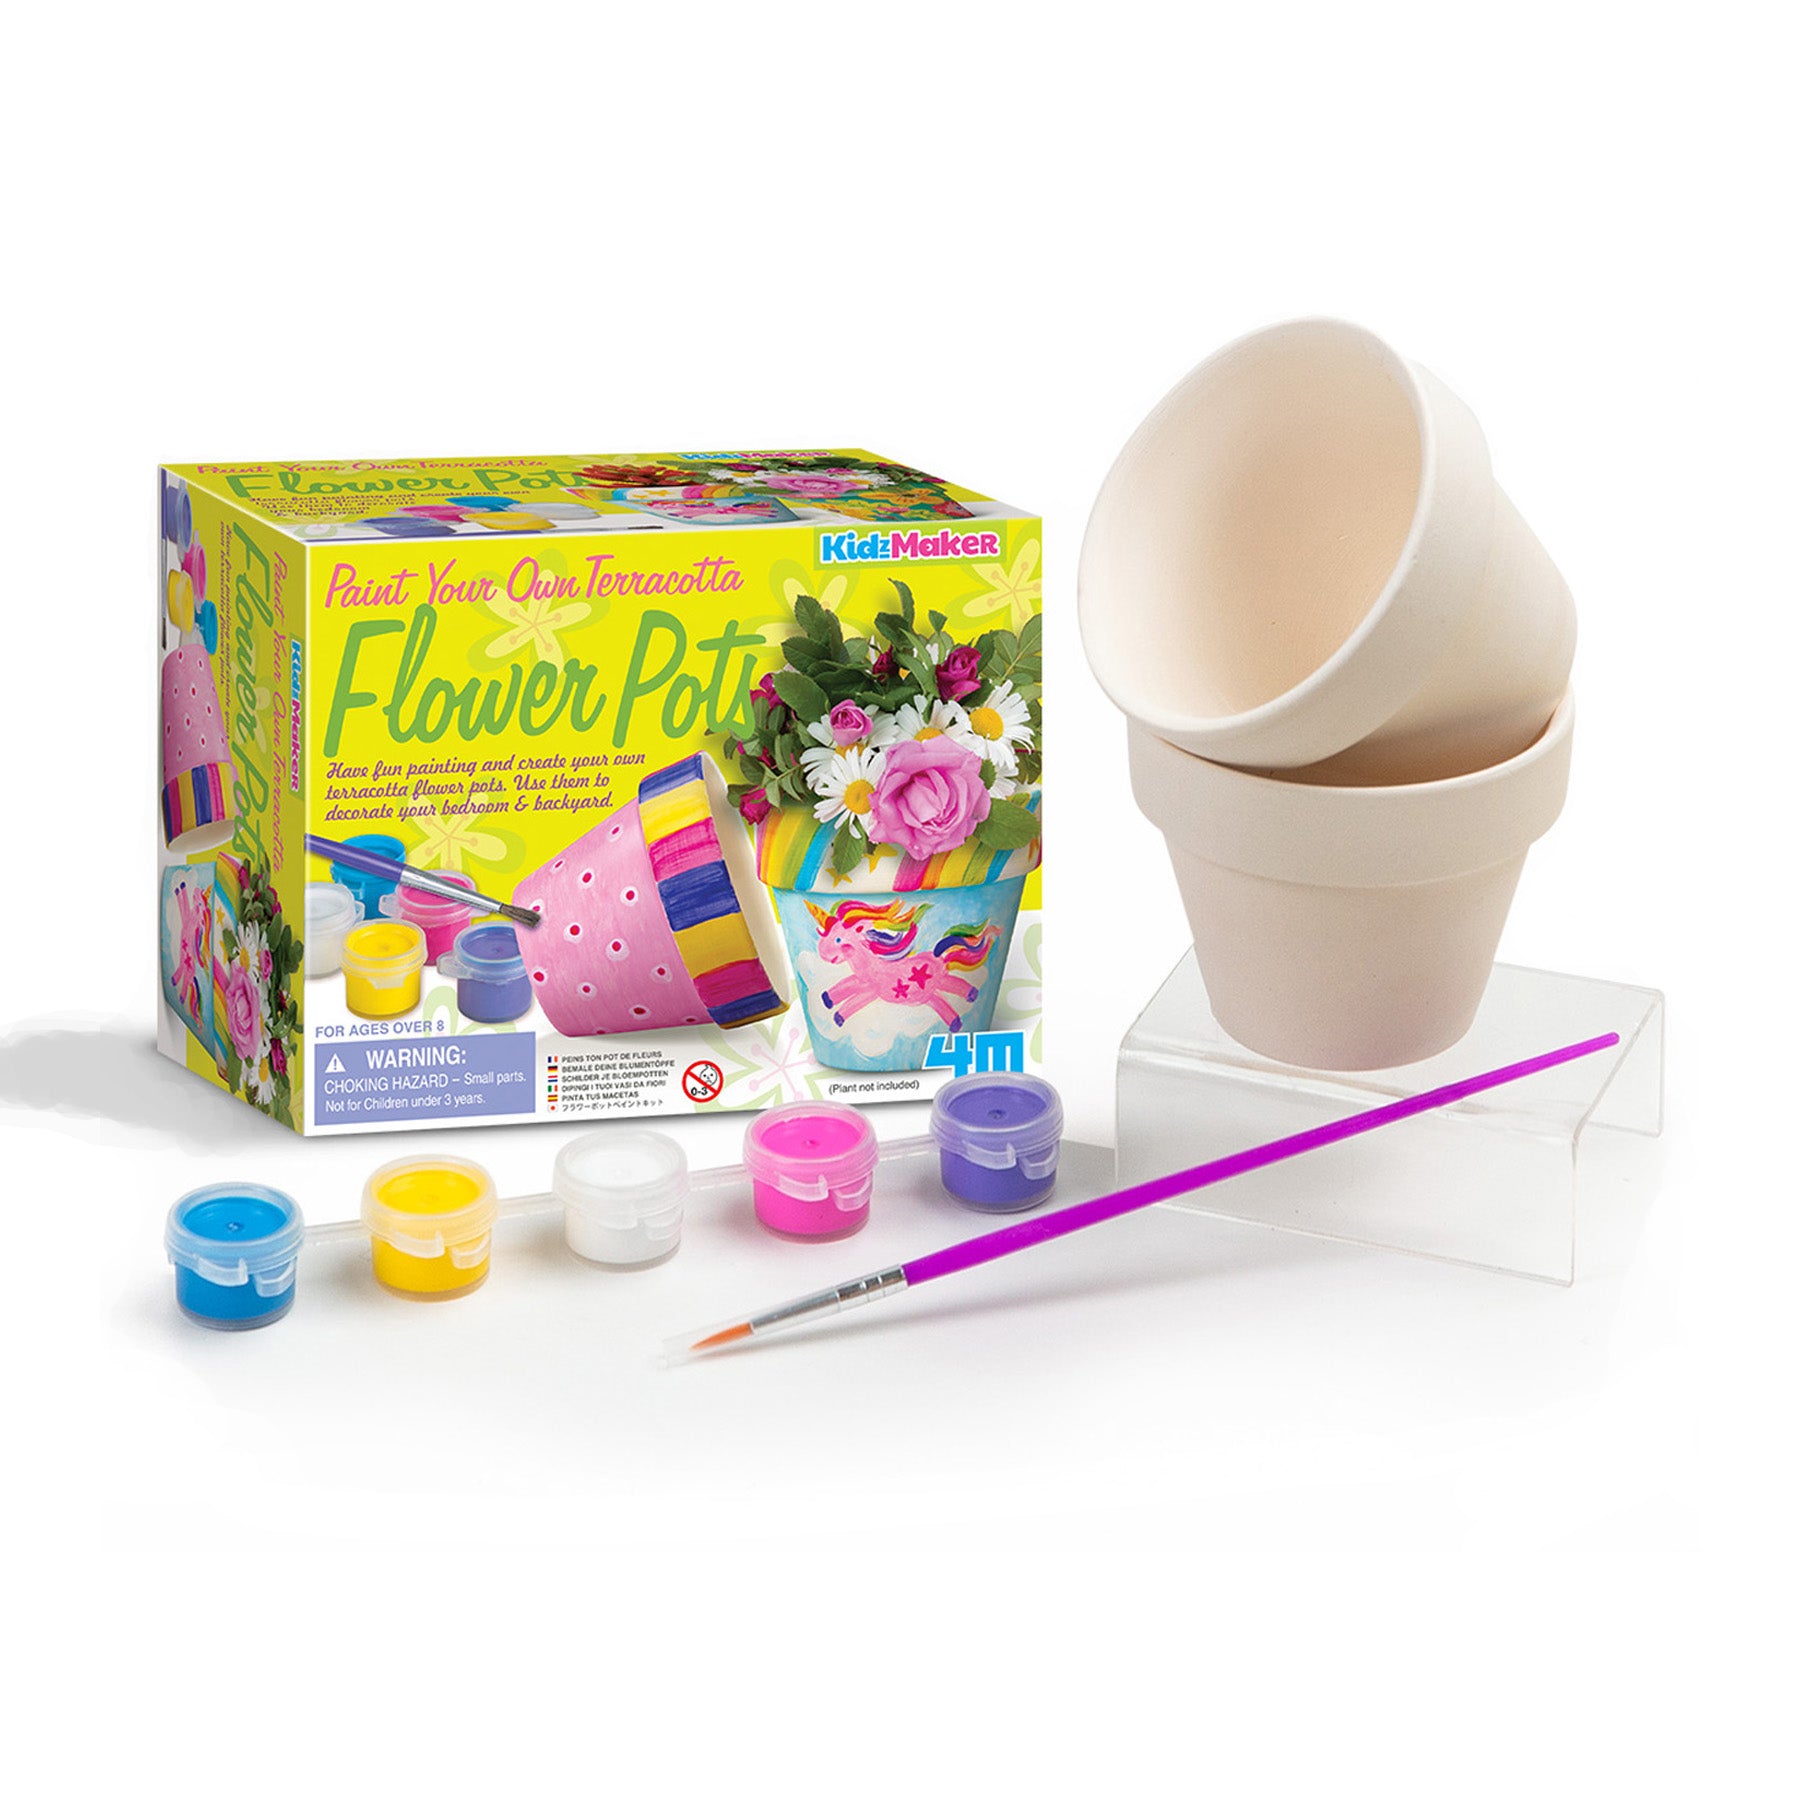 Paint Your Own Terracotta Flower Pots Kit - The Walters Art Museum